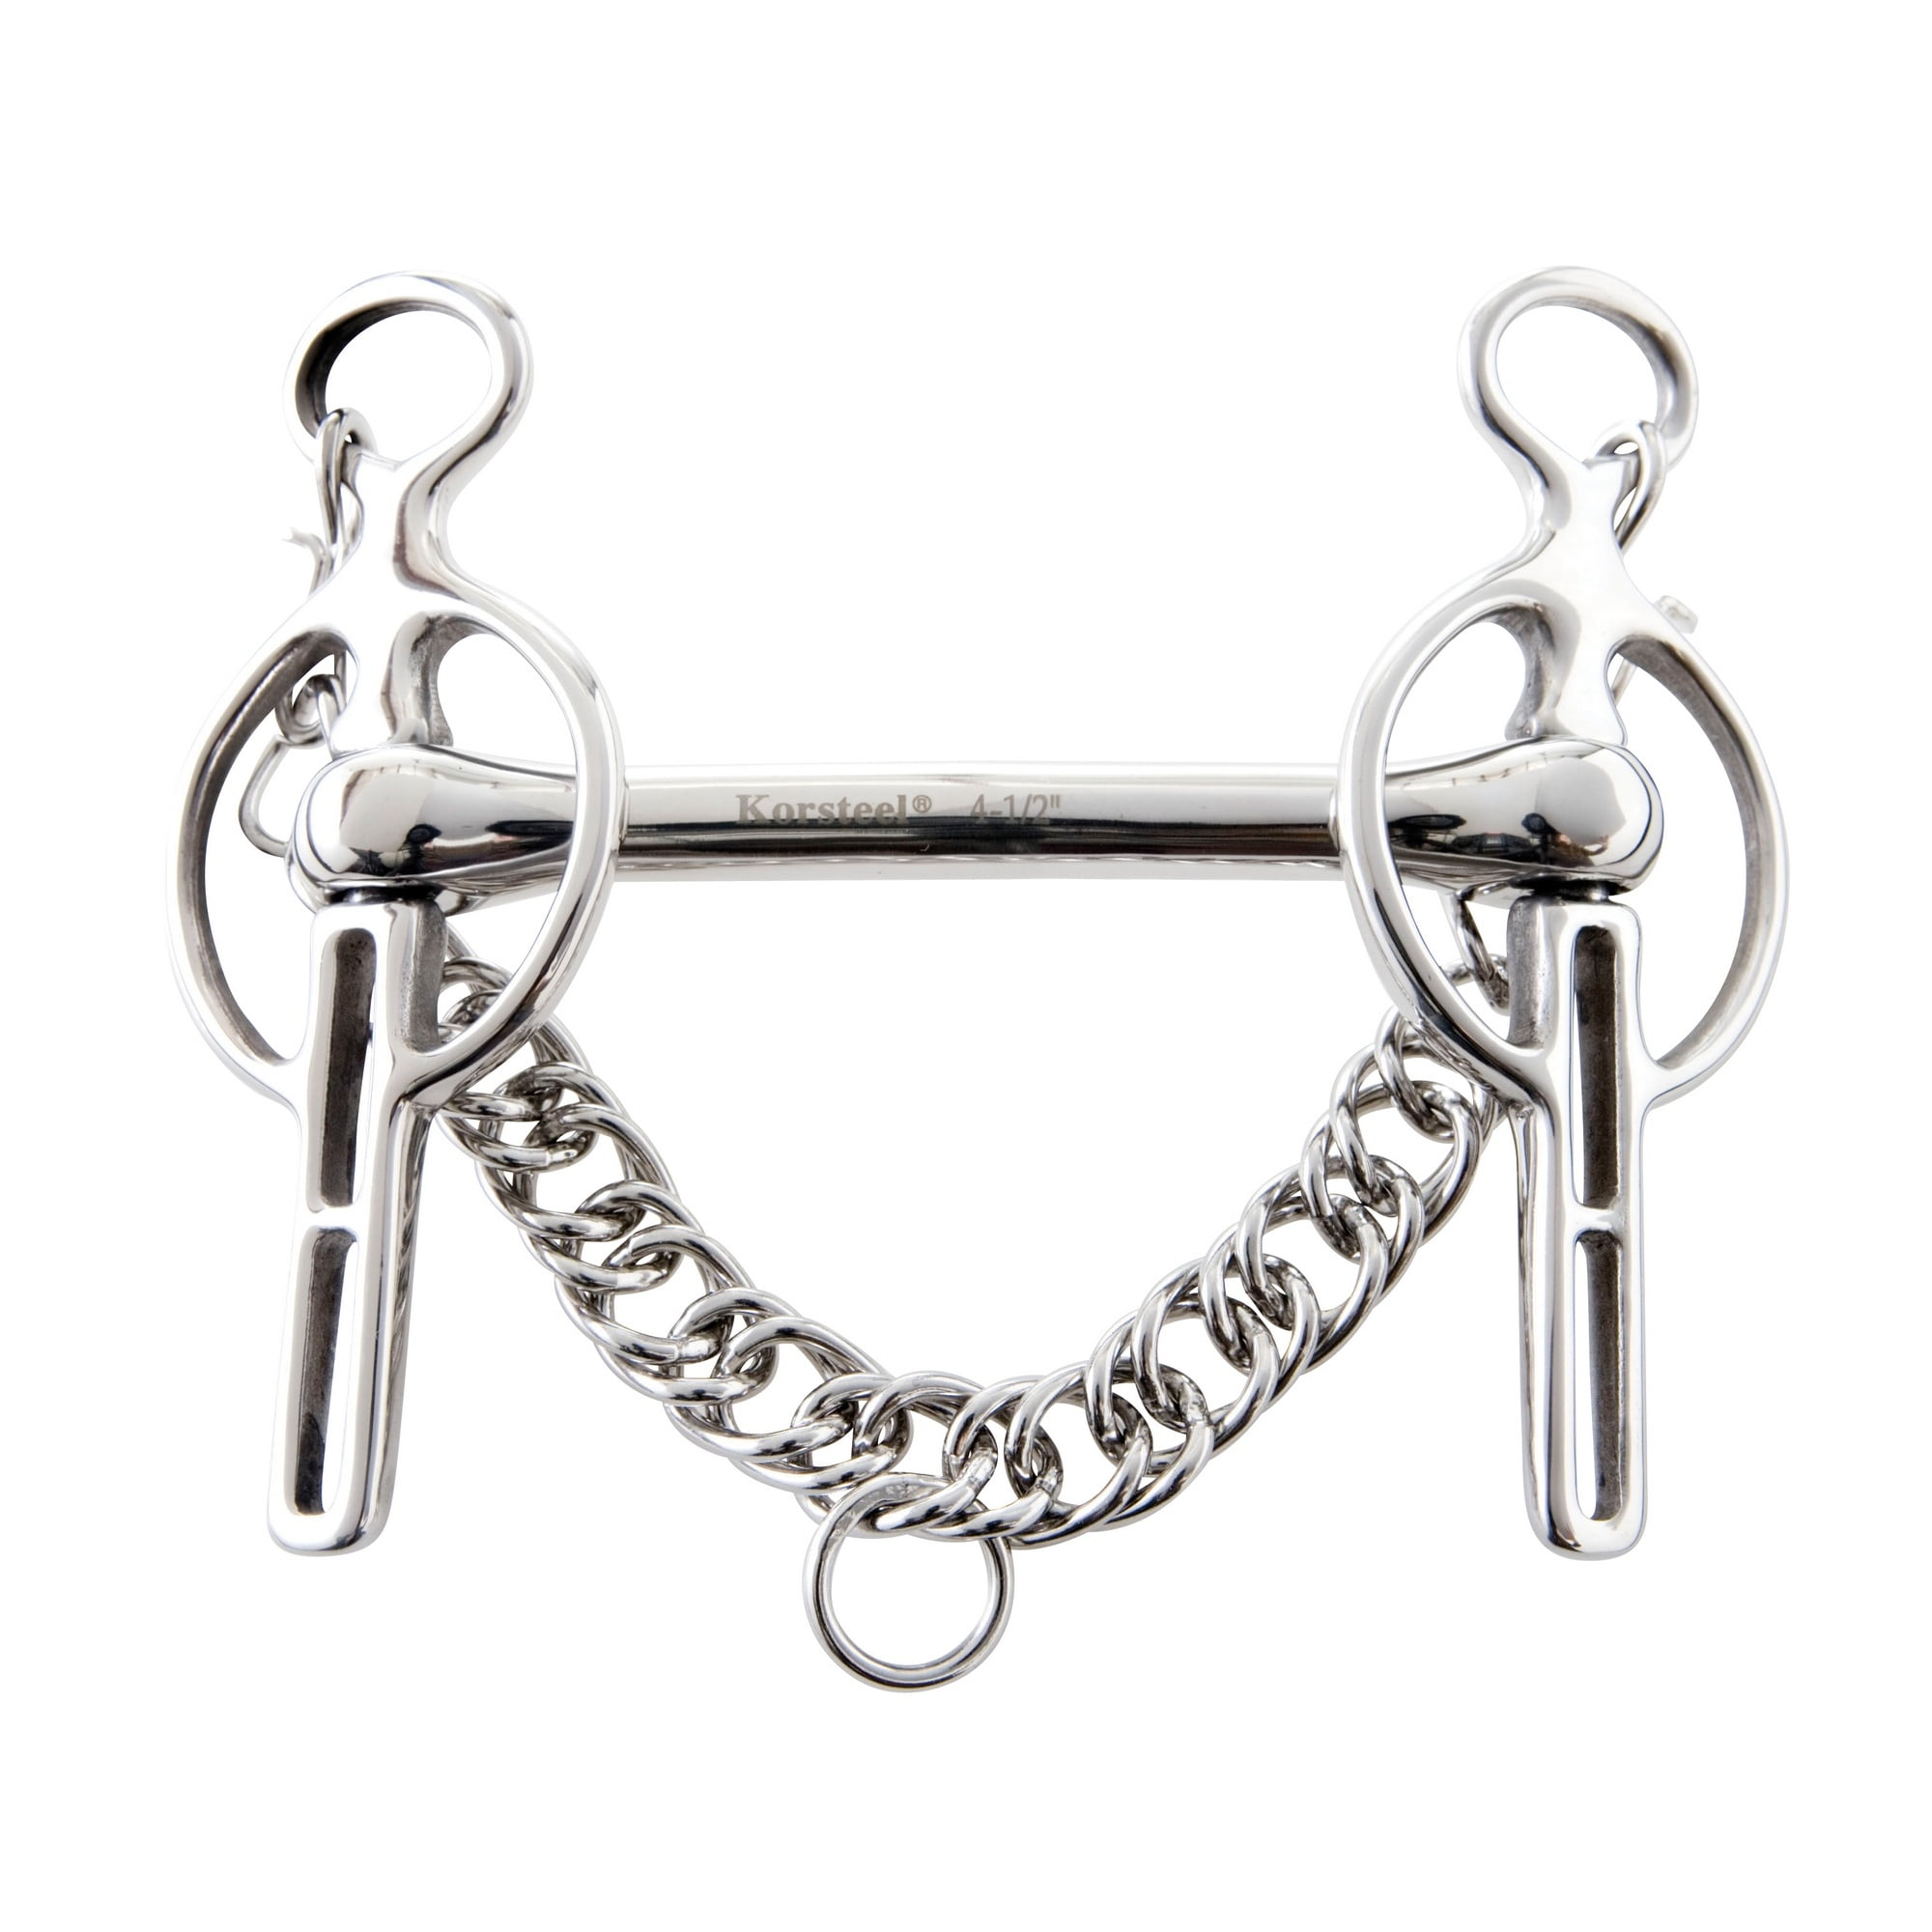 Liverpool Driving Bit 3 Slot Stainless Steel Horse & Pony Bit All Sizes